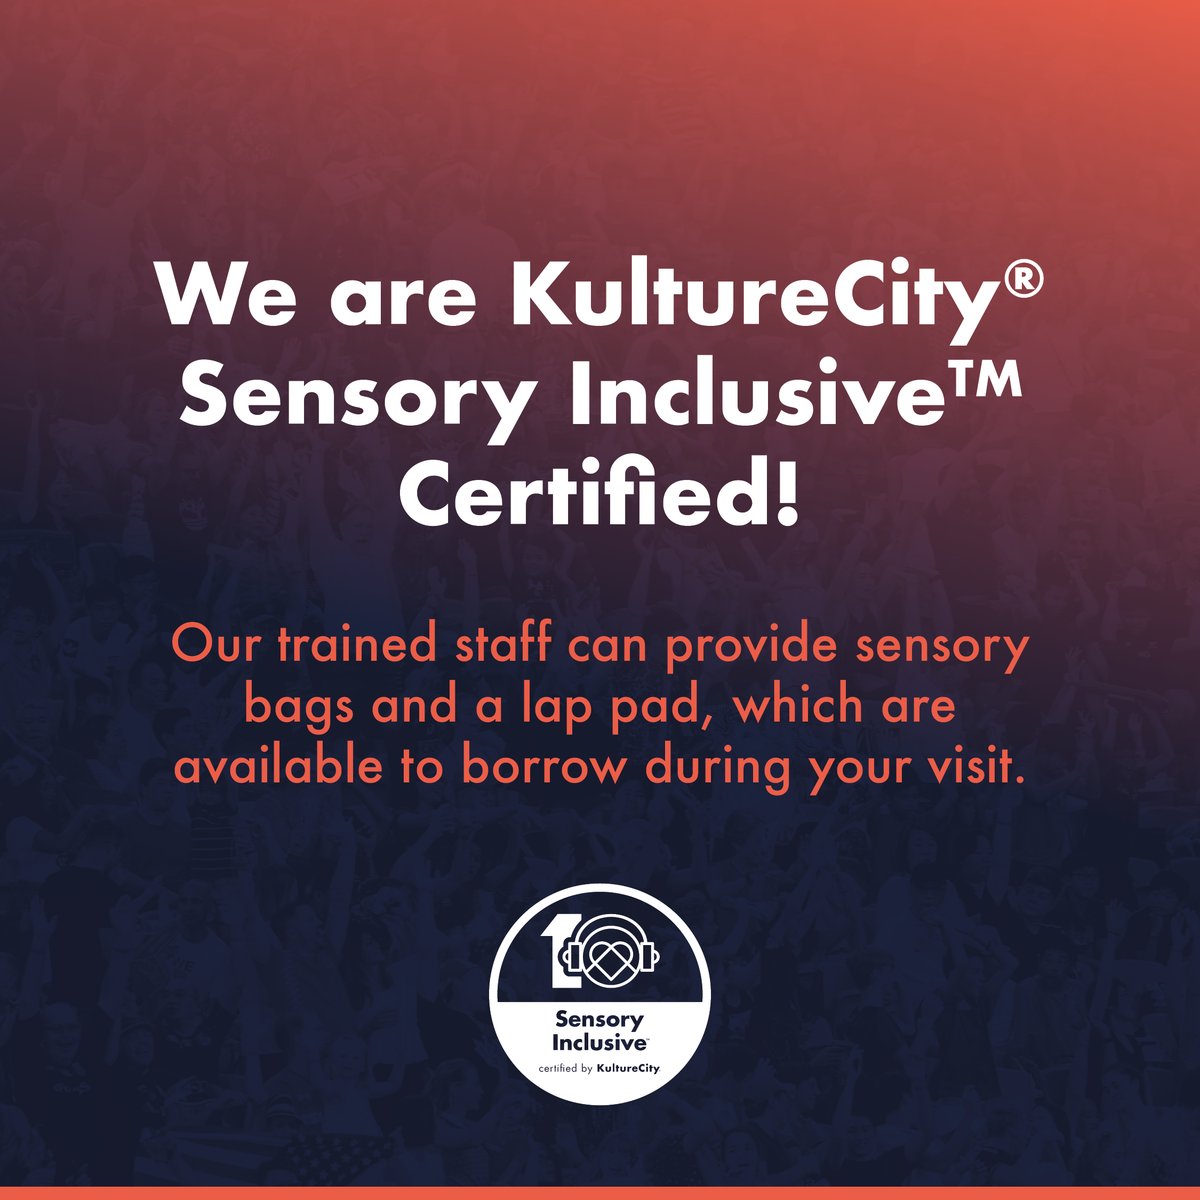 Bank of America Stadium is now a certified KultureCity Sensory Inclusive Venue! NFL games, MLS matches, concerts, & more are now accessible with noise-canceling headphones & fidget tools available at Guest Relations booths. We're dedicated to making every event enjoyable for all!